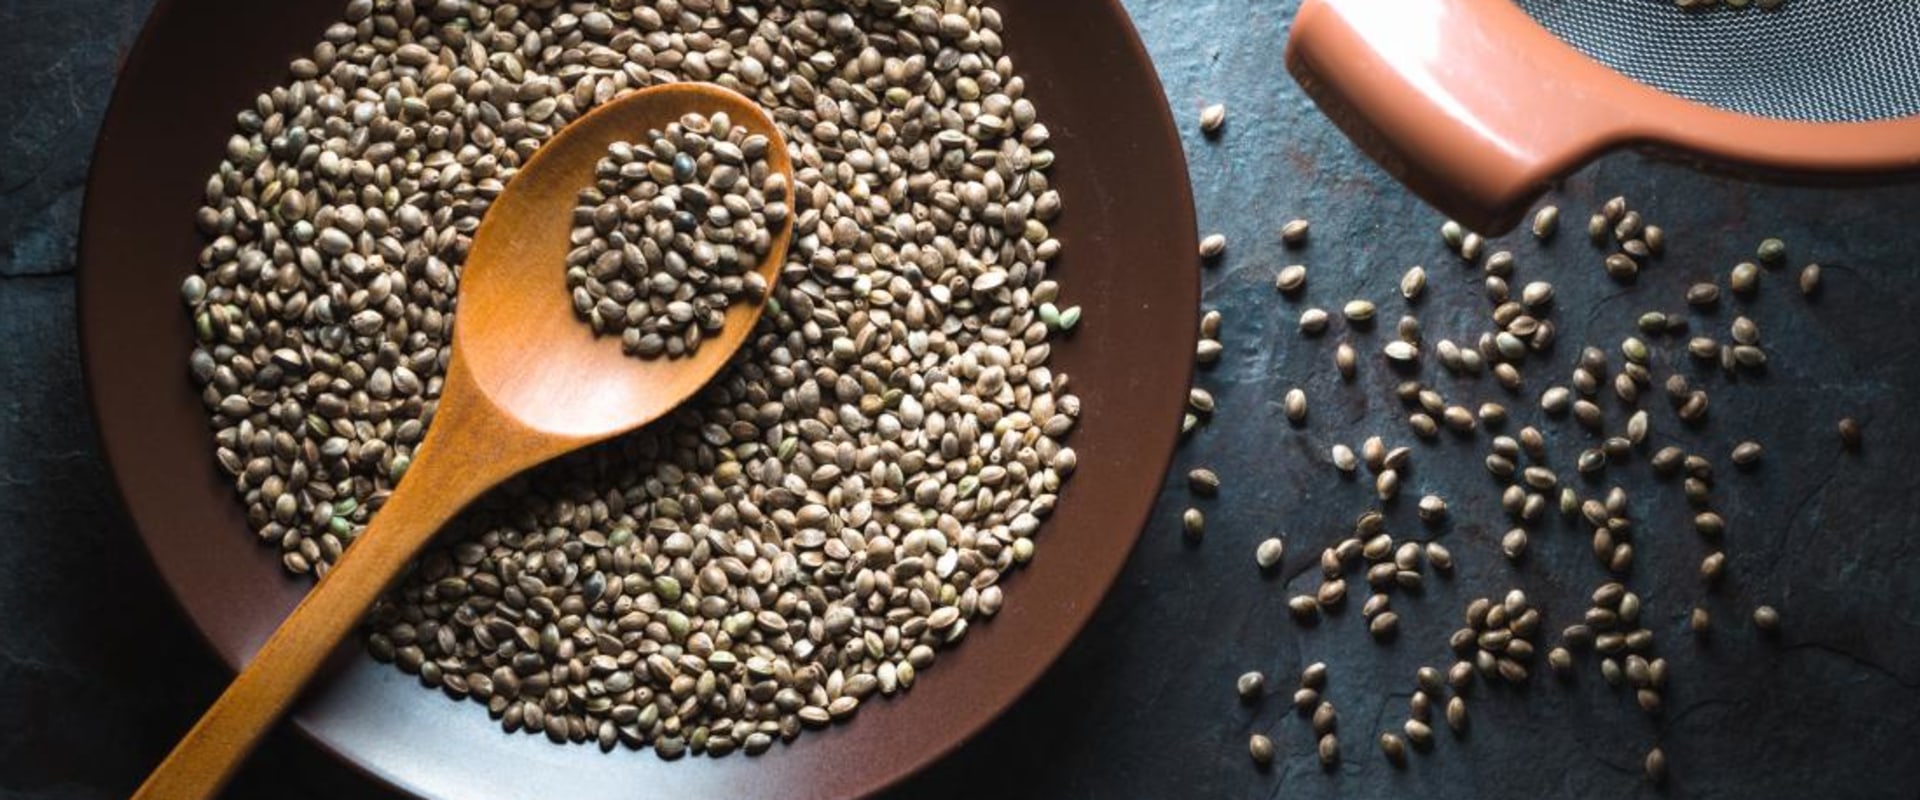 What is Hemp Seed Made Of?